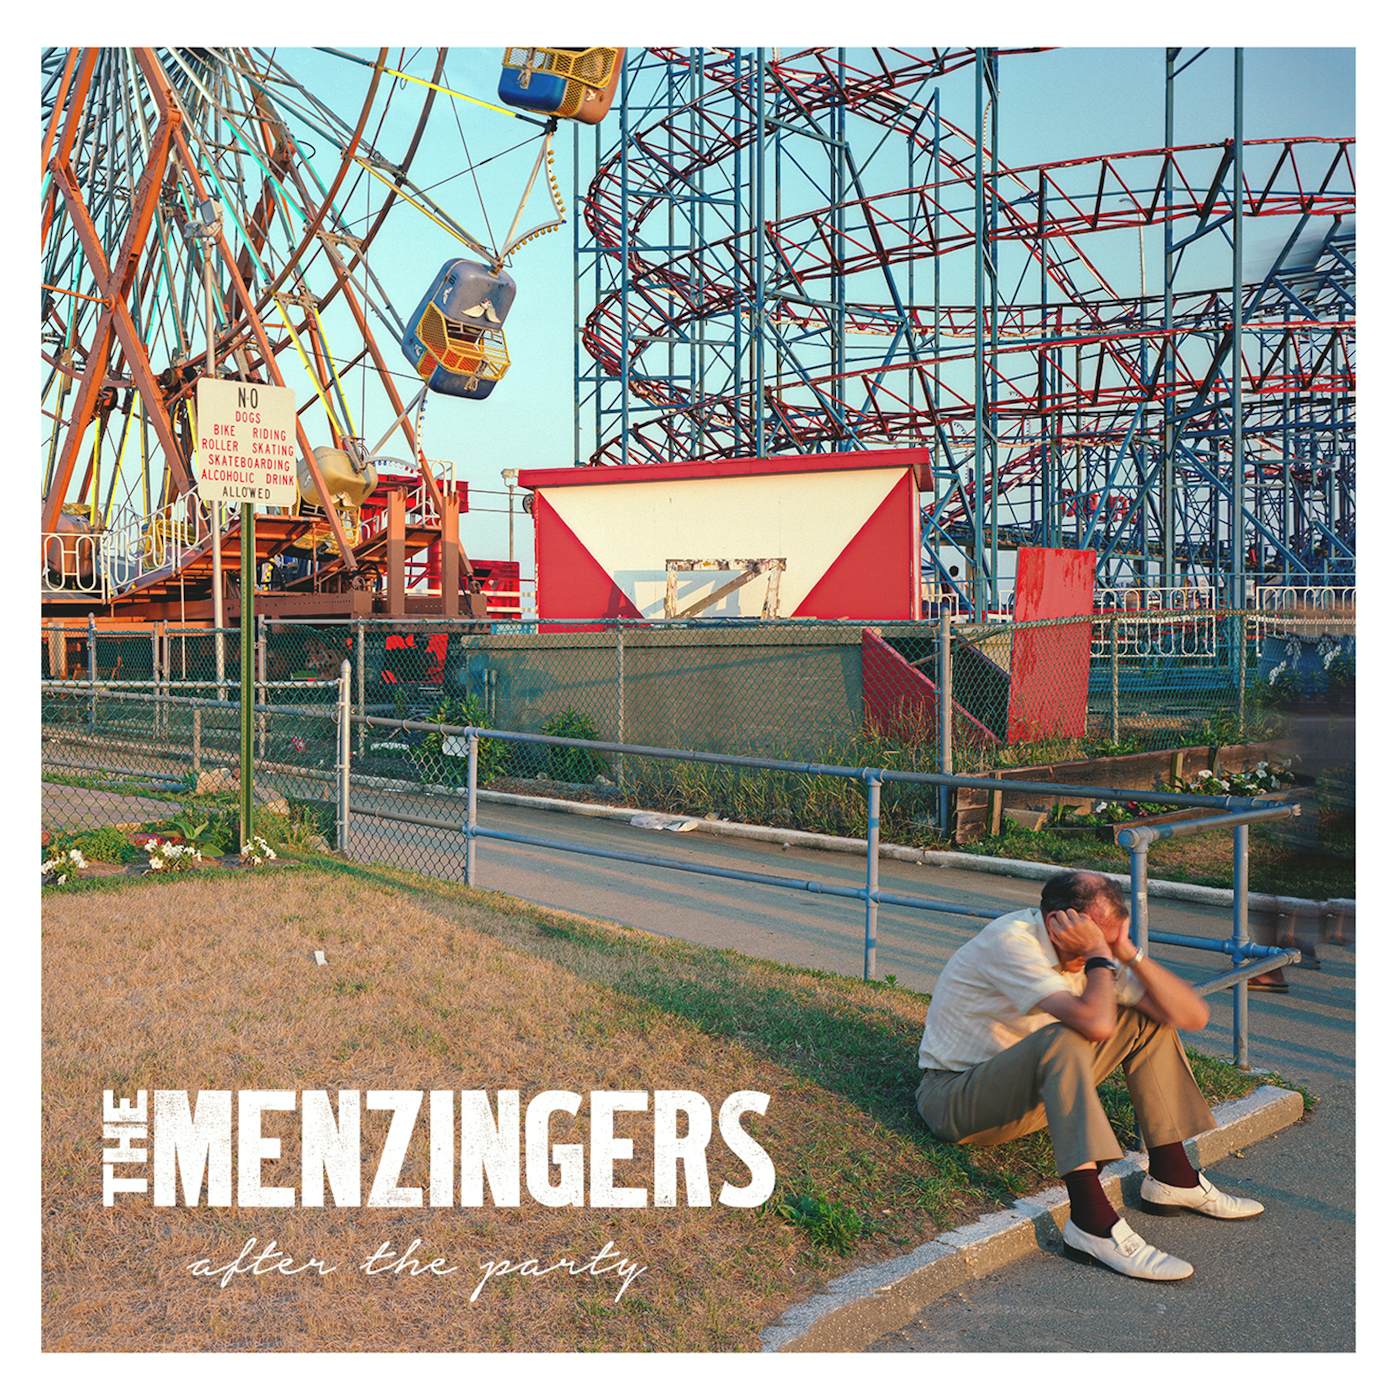 The Menzingers AFTER THE PARTY CD